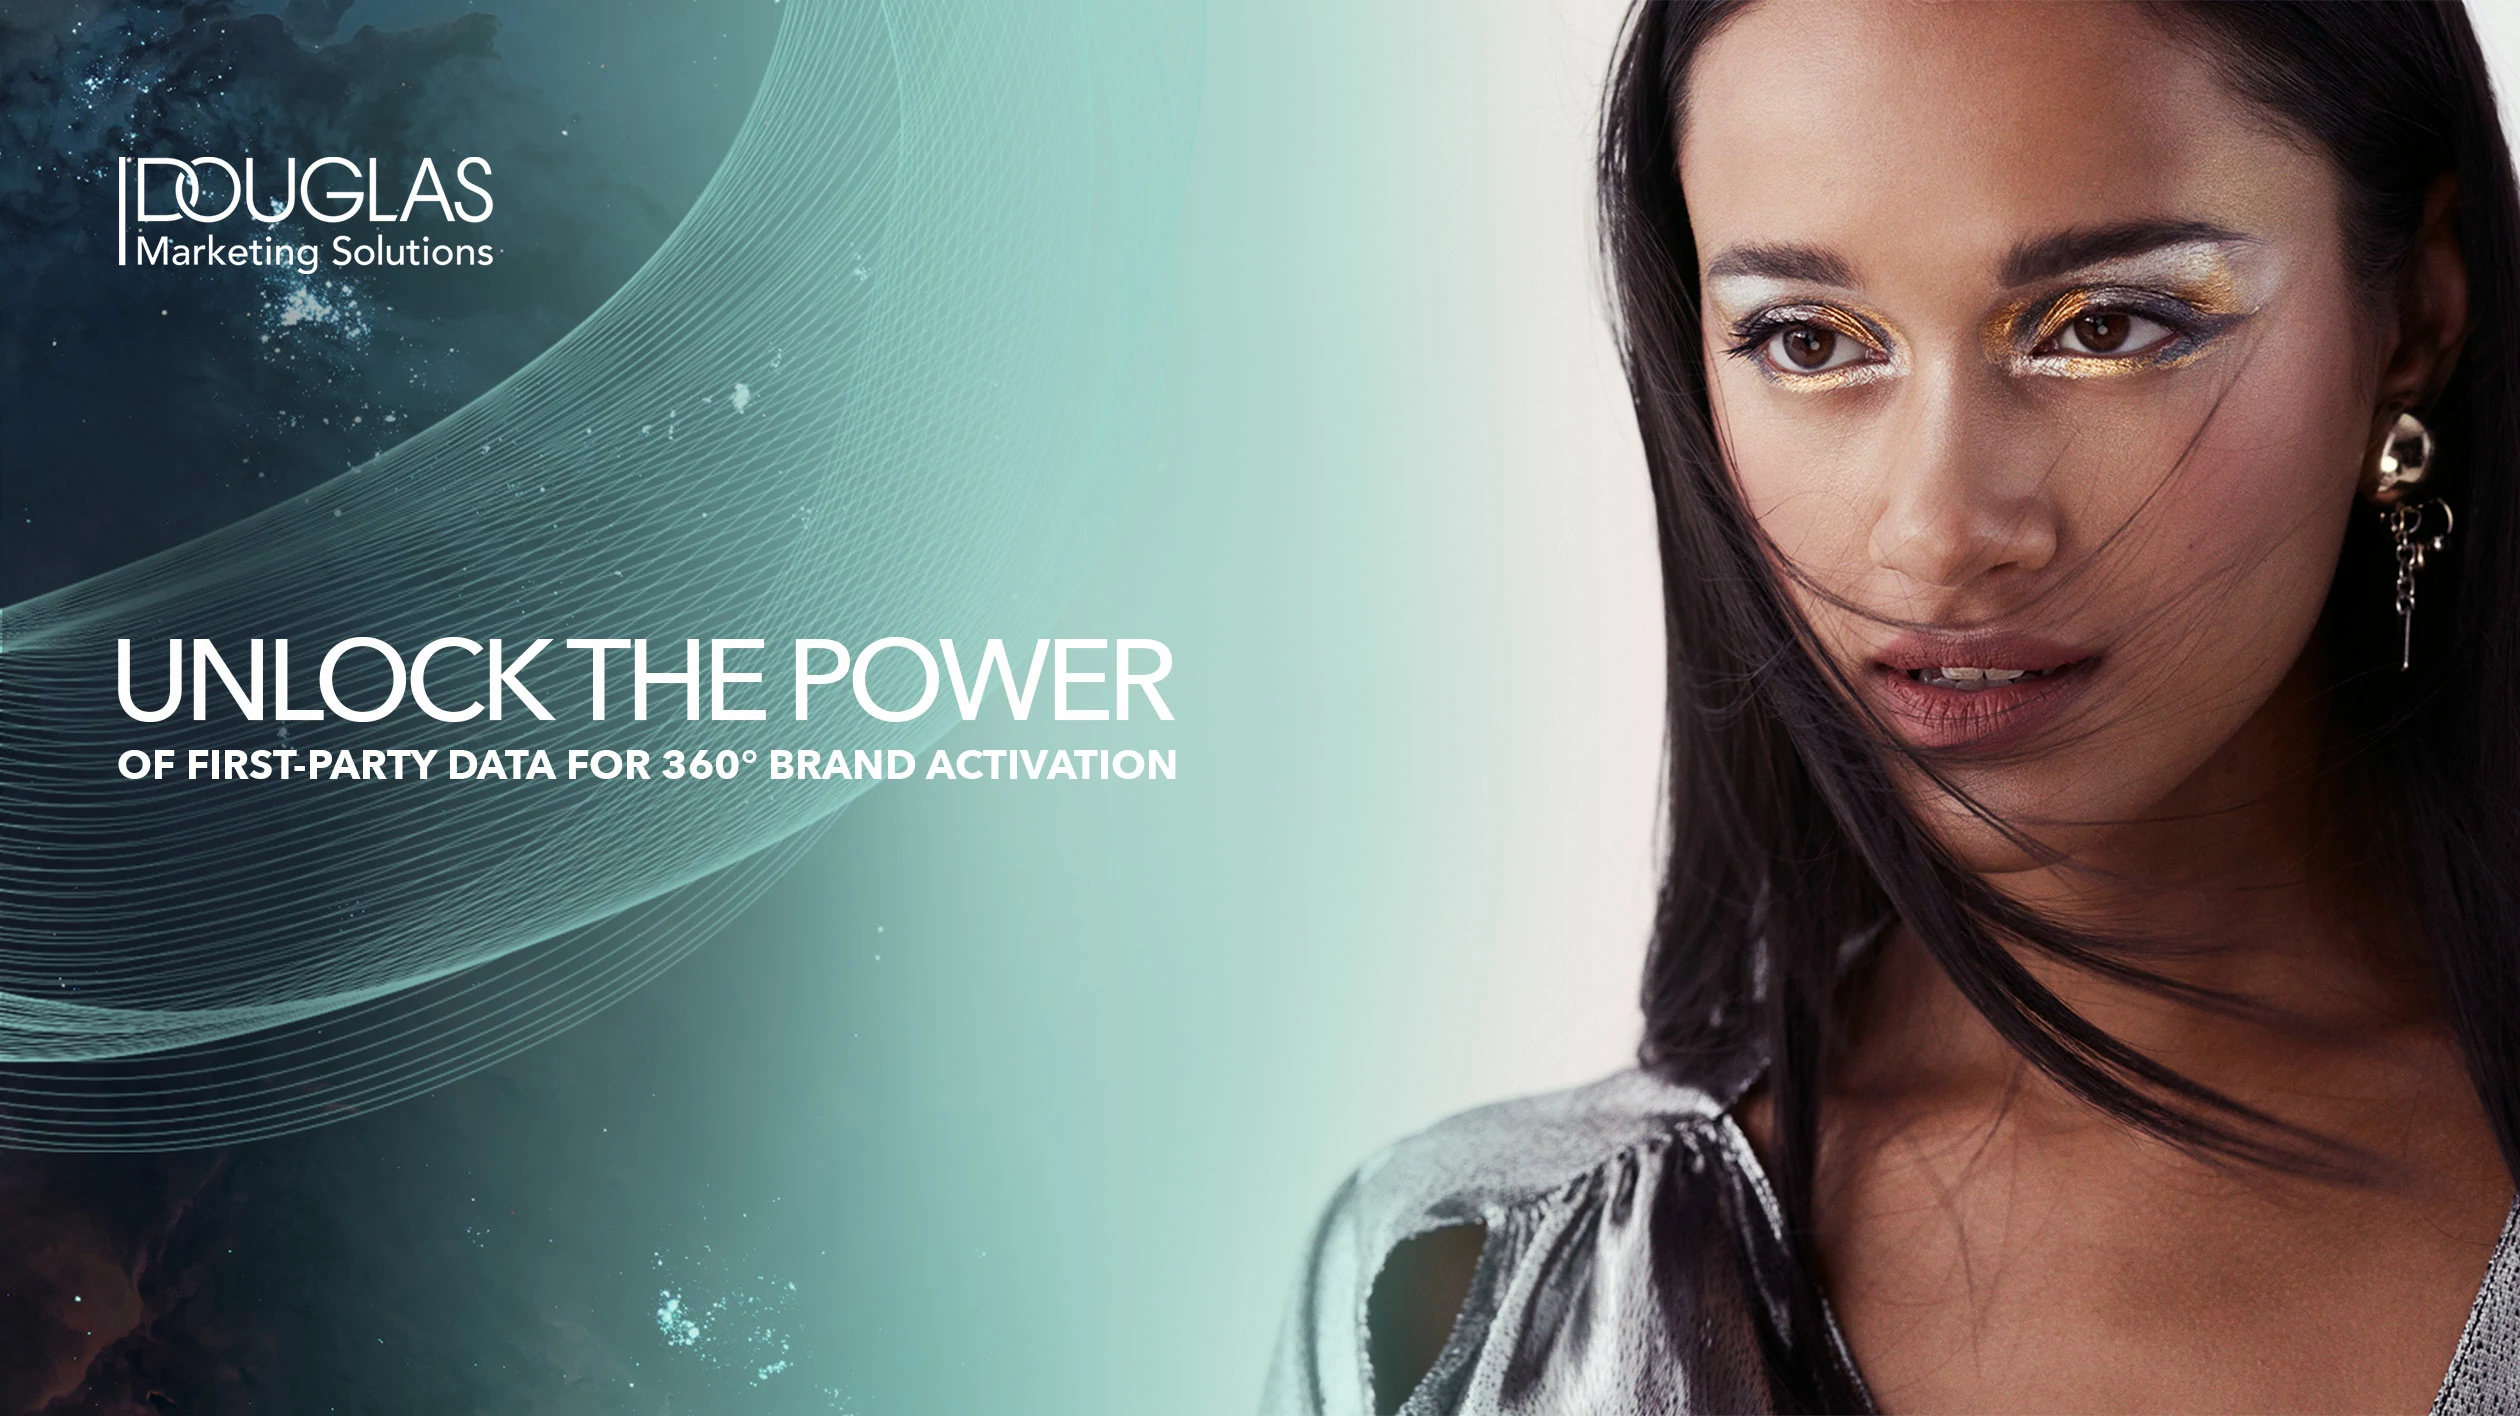 Futuristic made-up model with Douglas Marketing Solutions logo and the text "Unlock the power of first party data for 360° brand activation"